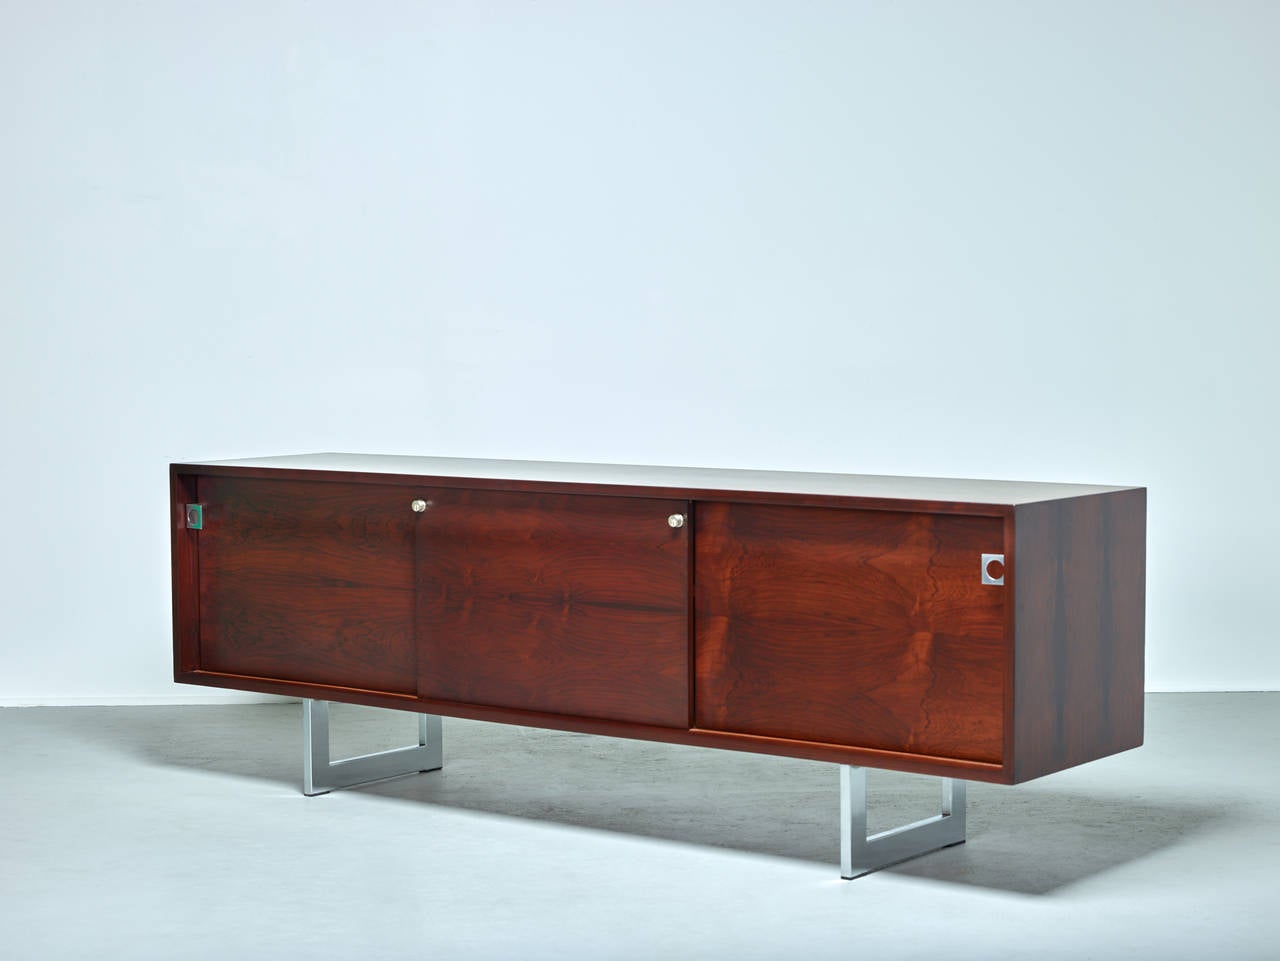 Bodil Kjaer cabinet.

E. Pedersen & Son,
Denmark, circa 1960.

Rosewood and stainless steel.
Measures: 72.25 W x 17 D x 25 H inches.

Original condition with backside outfitted for electrical. Can be re-finished.